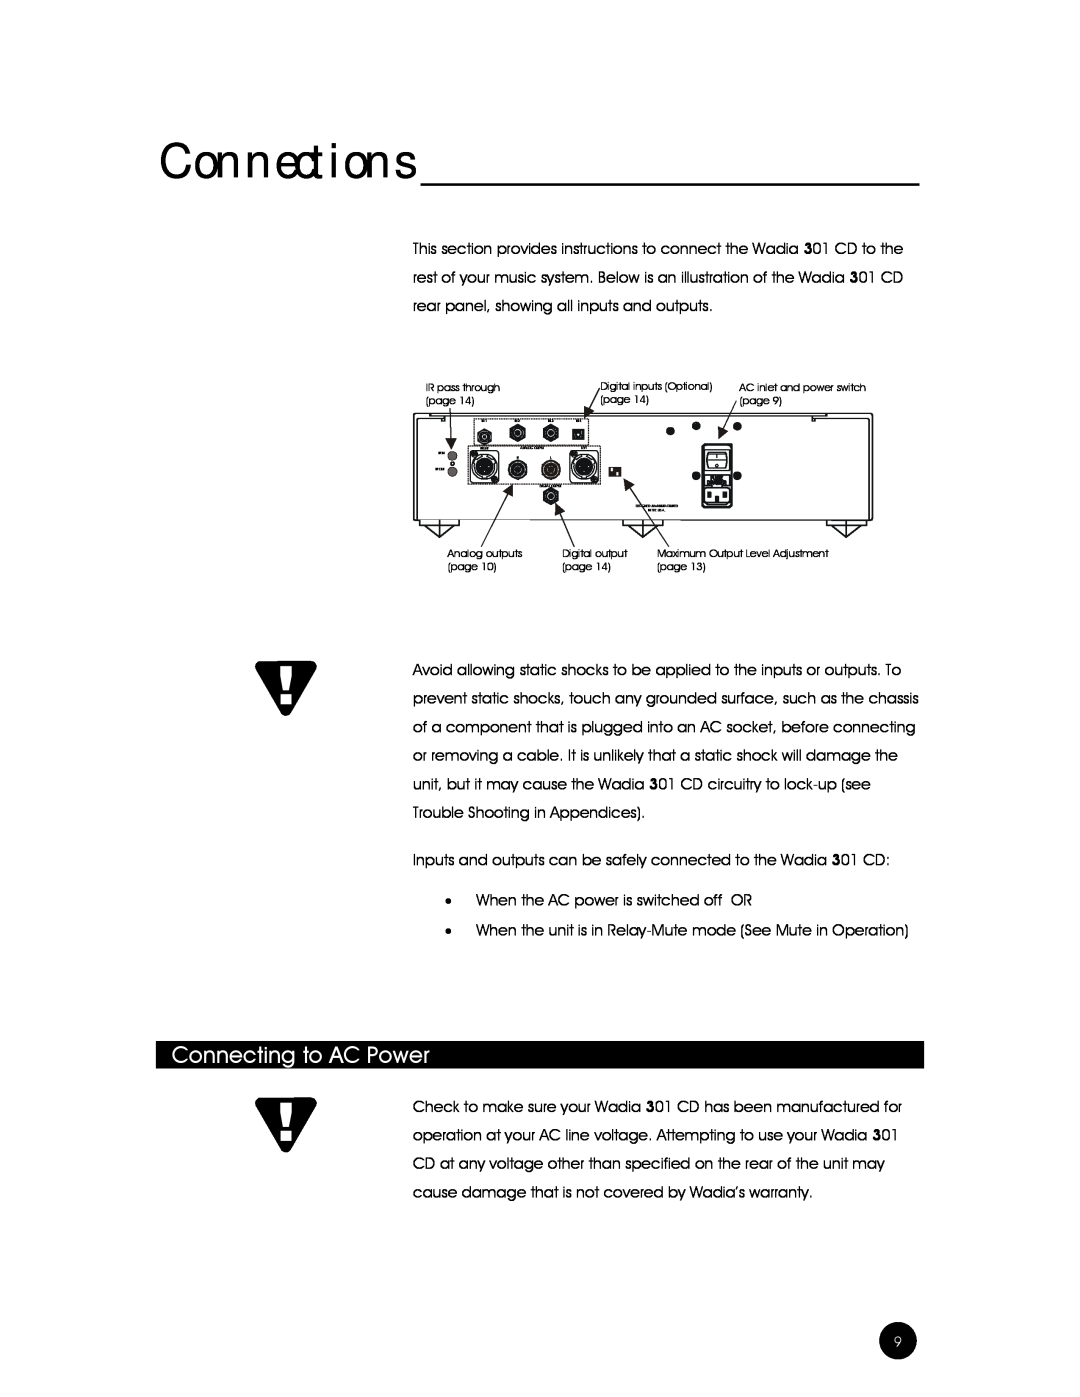 Wadia Digital 301 owner manual Connections, Connecting to AC Power 